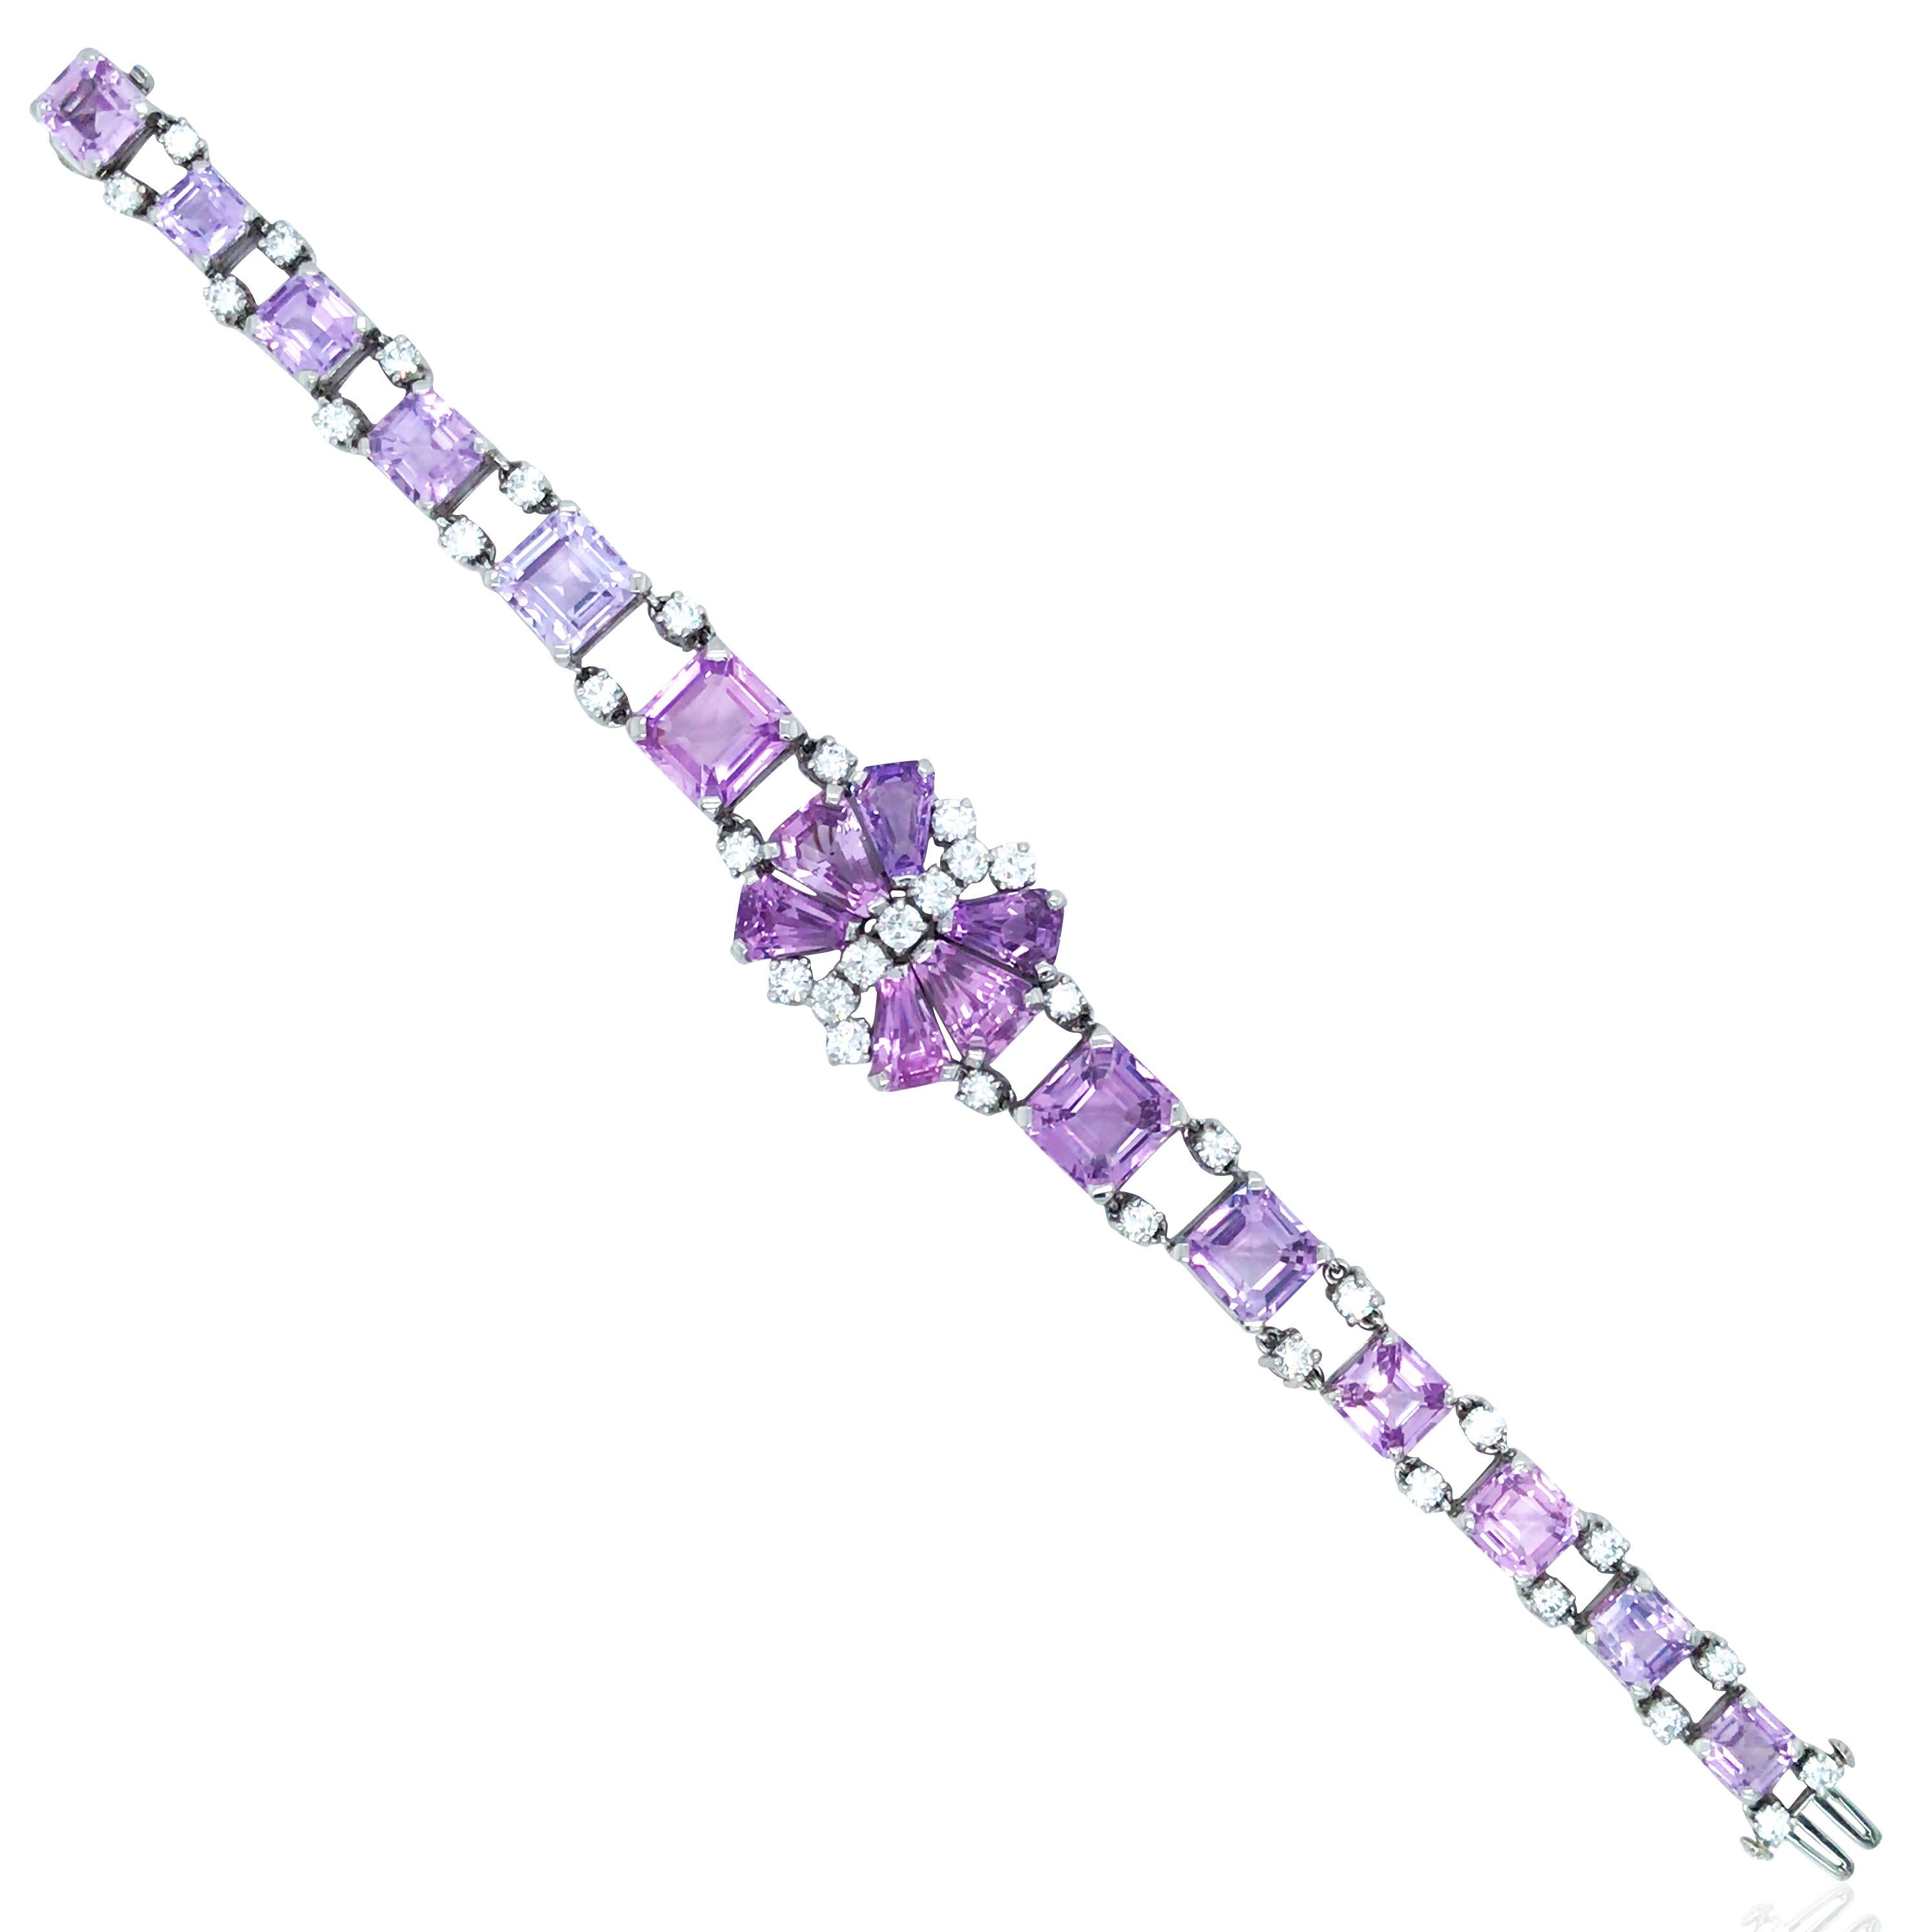 This light pink sapphire bracelet is created with 18 sparkling sapphires of approximately 42 ct. The large carat weight of the sapphires makes the entire bracelet look dazzling. Diamonds are embellished between the sapphires for a total of 35 pieces